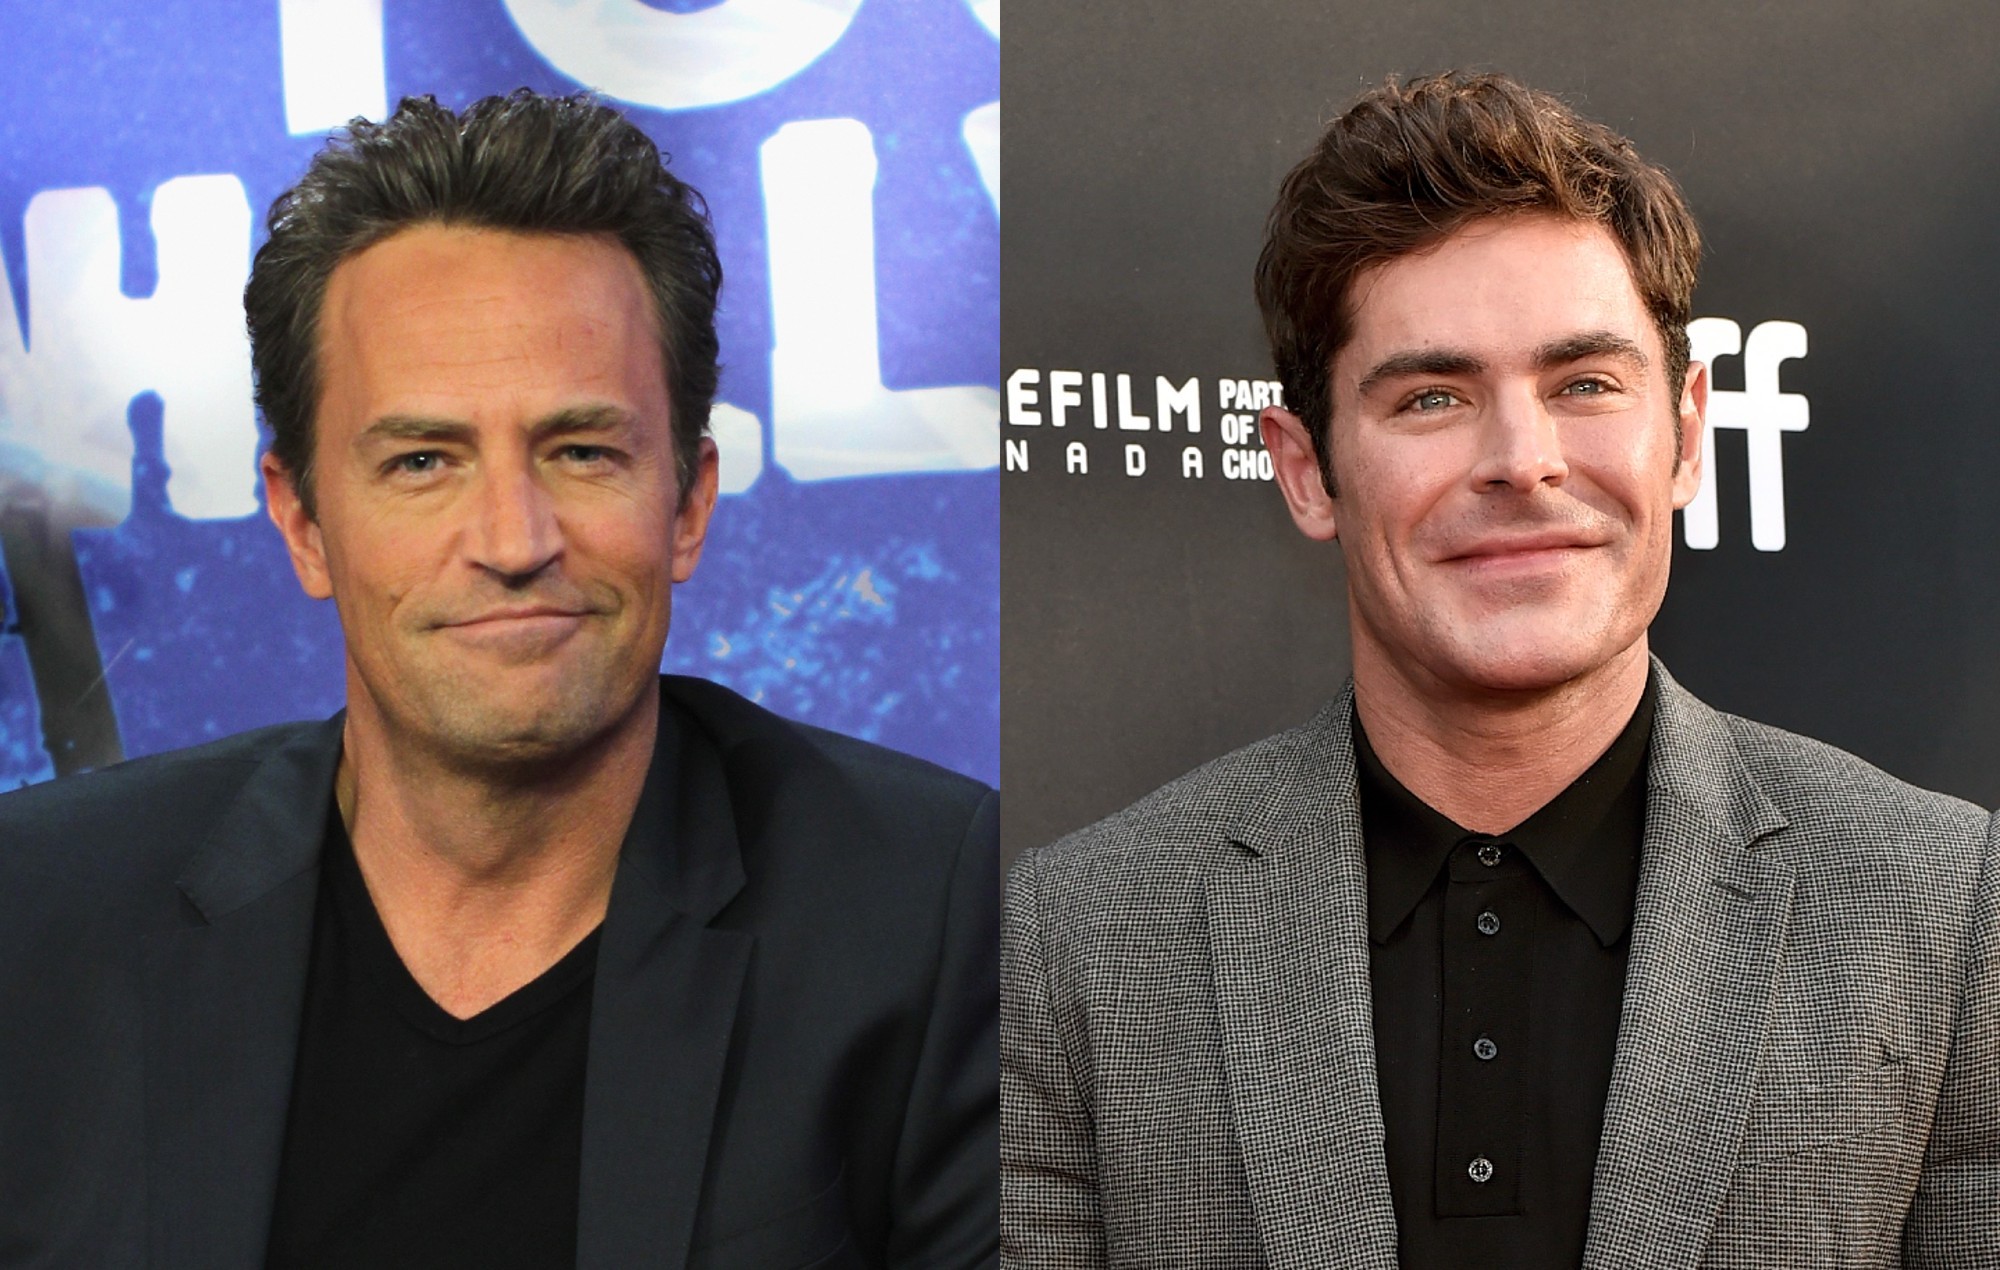 Matthew Perry was planning to ask Zac Efron to play him in a biopic before his death